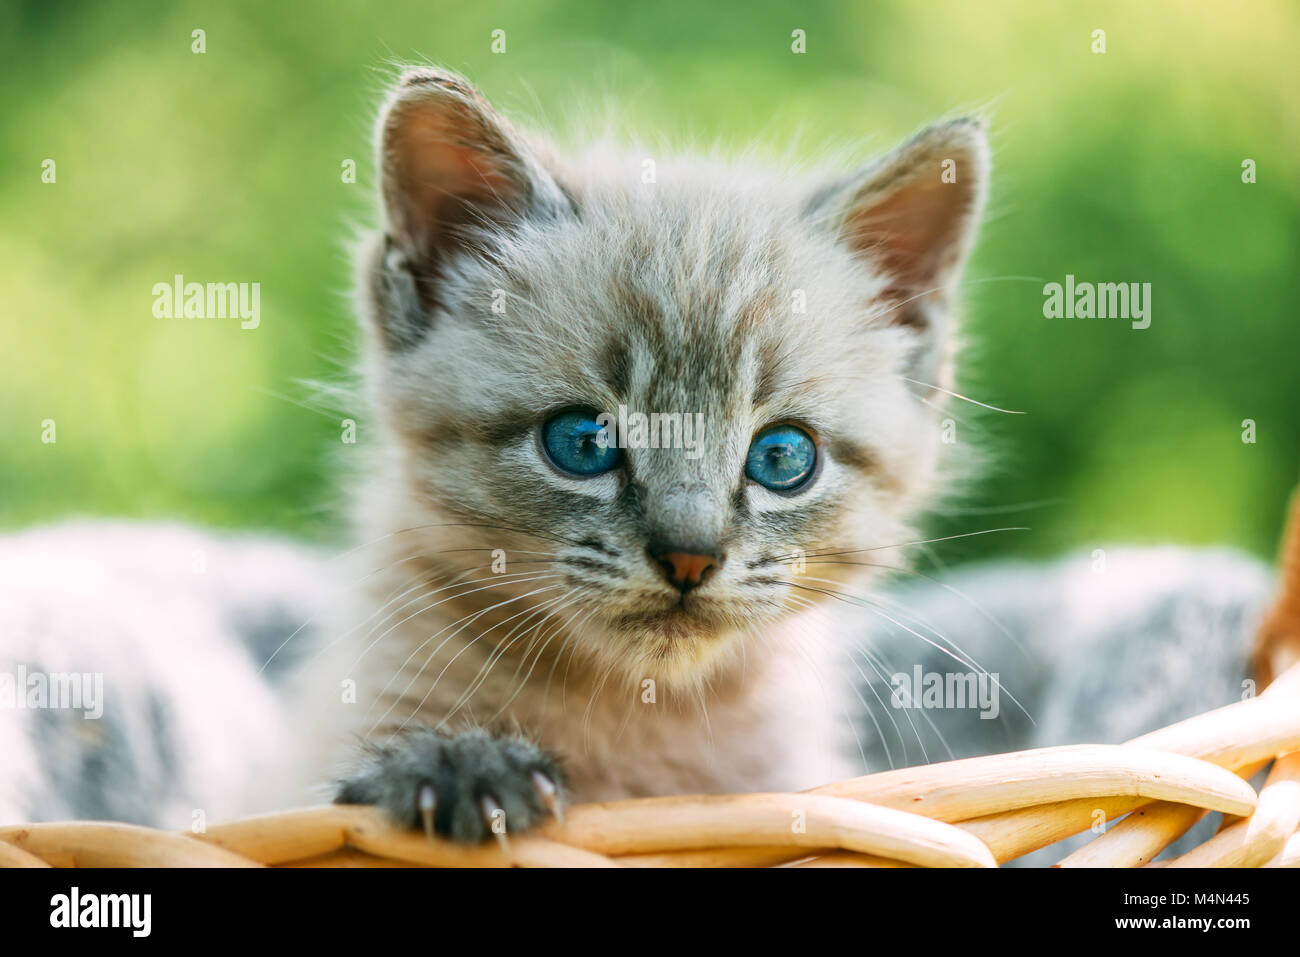 Small kitten with blue ayes in basket Stock Photo